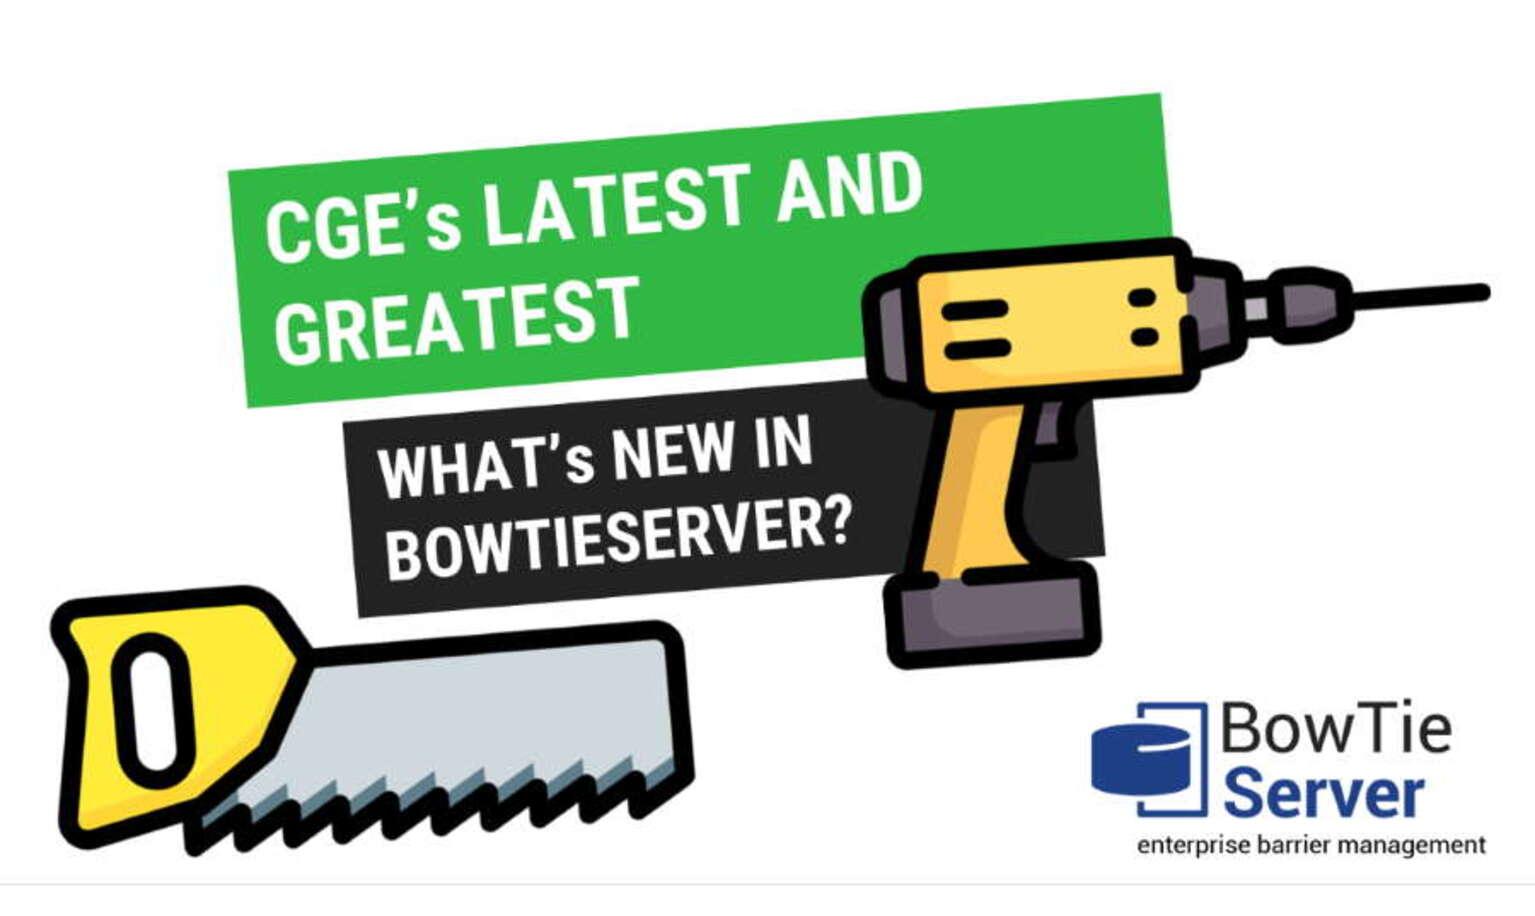 CGE’s Latest and Greatest – What’s new in BowTieServer?